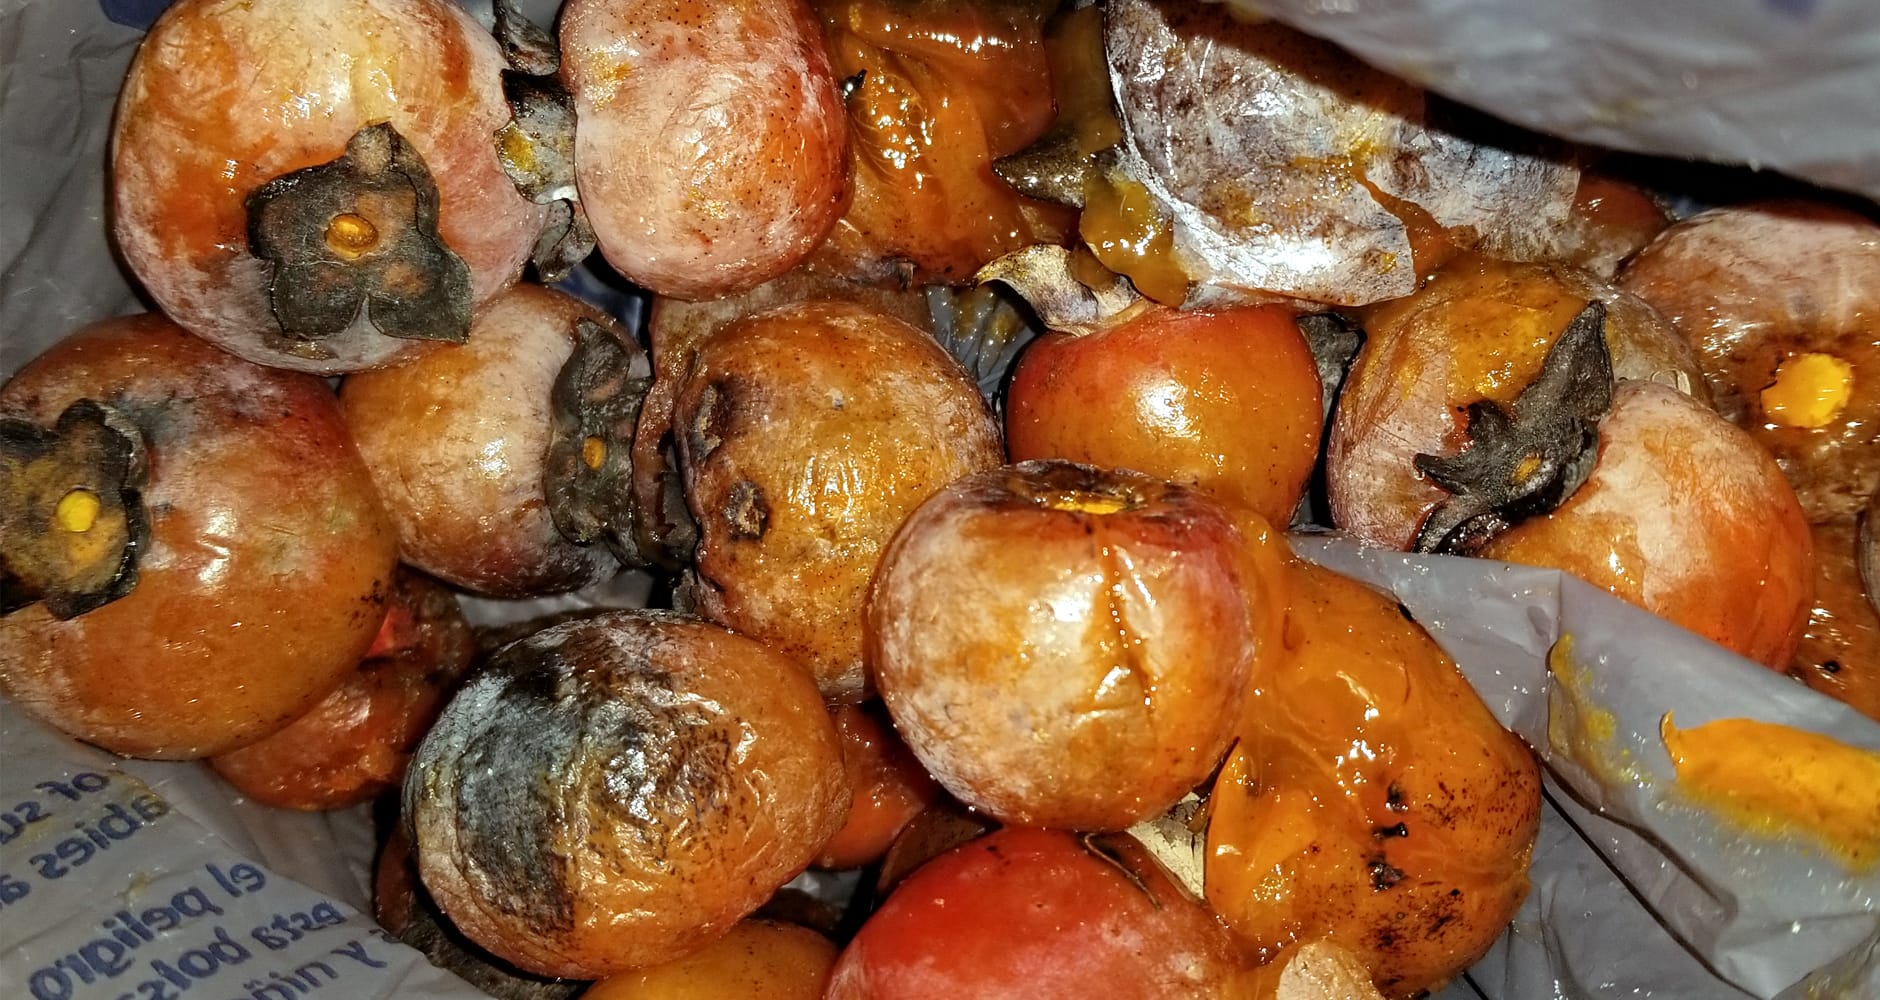 Persimmon fruit gathered for winter forecasting